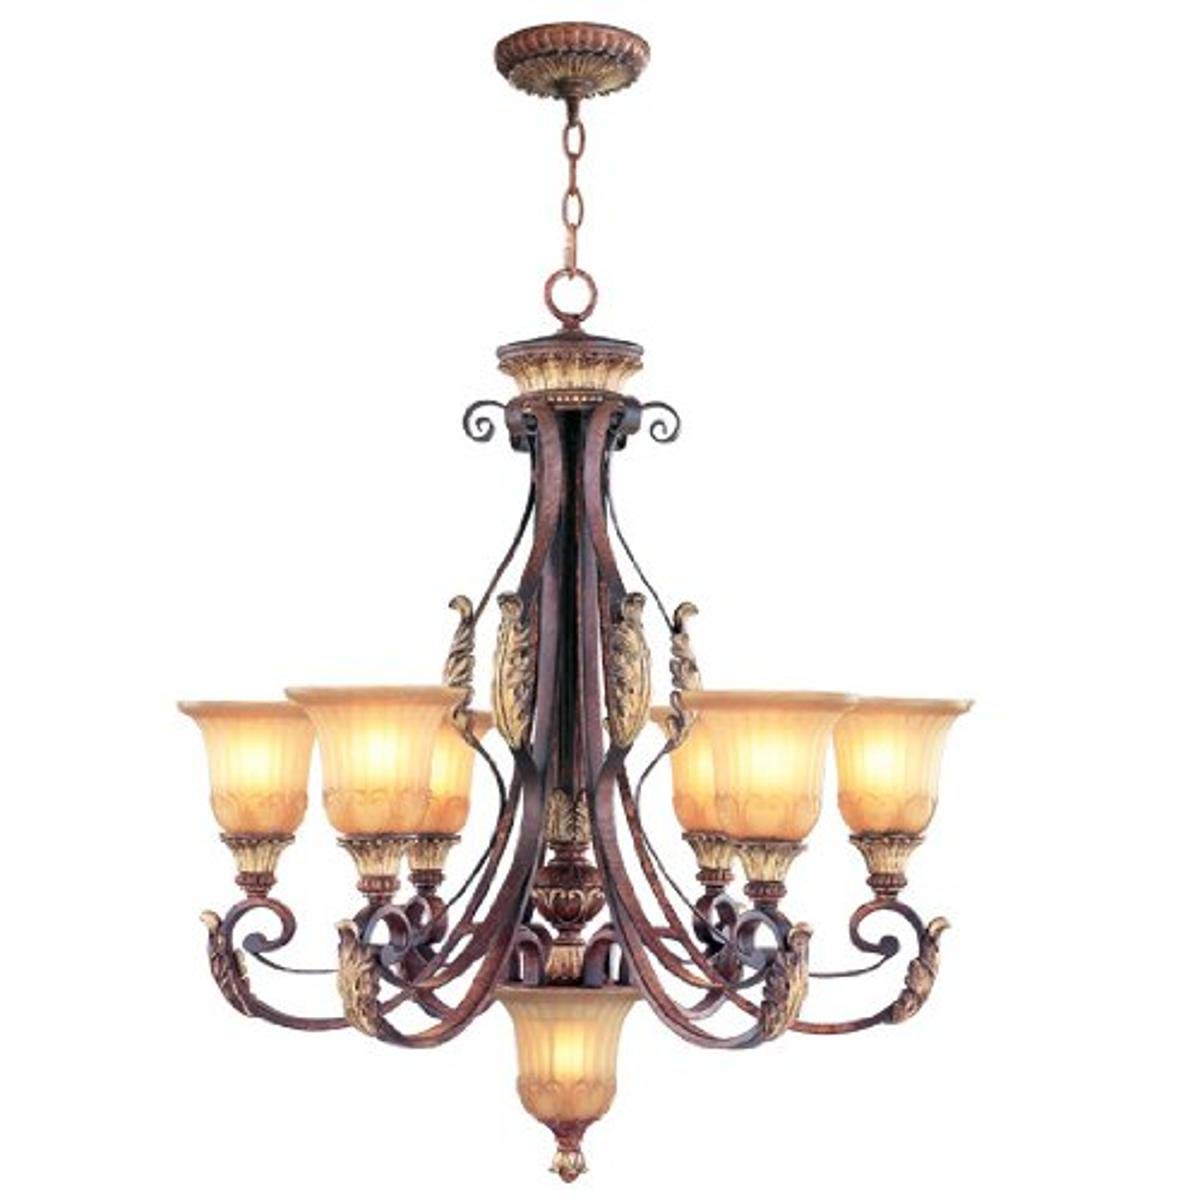 Livex Lighting 8576-63 Villa Verona 6 Light Verona Bronze Finish Chandelier with Aged Gold Leaf Accents and Rustic Art Glass